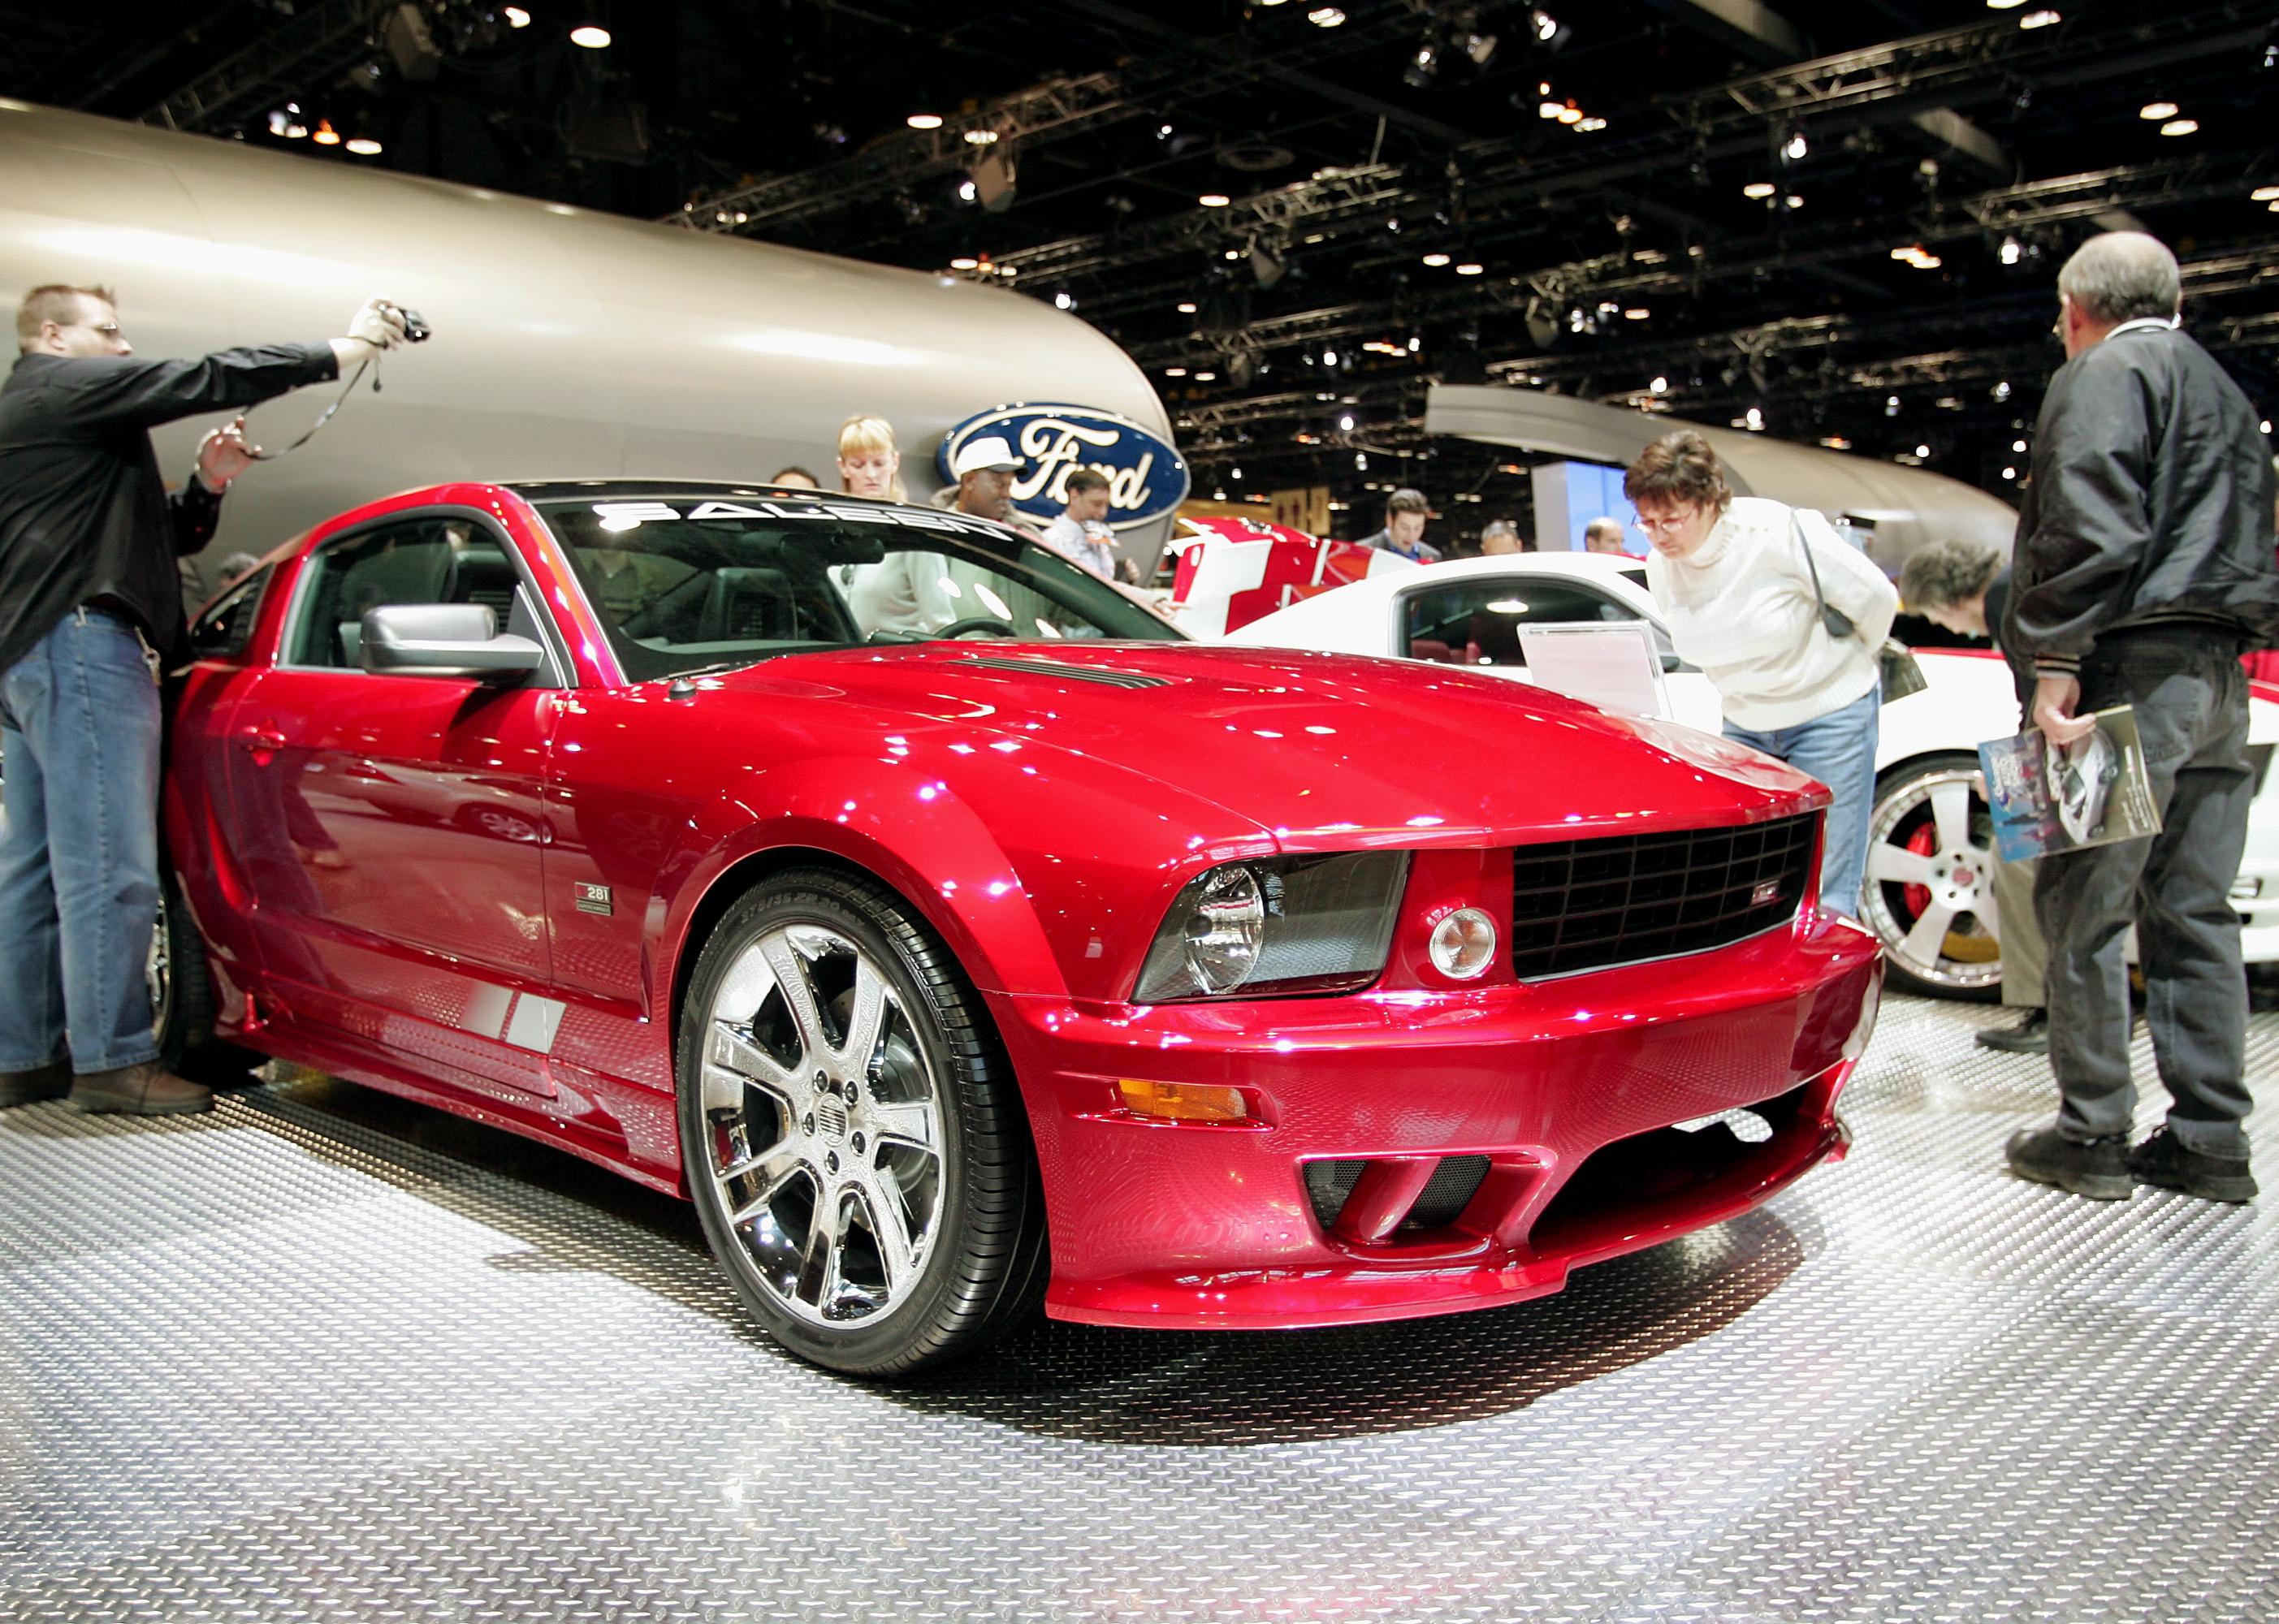 A red Saleen S281 Ford Mustang at the Chicago Auto Show.